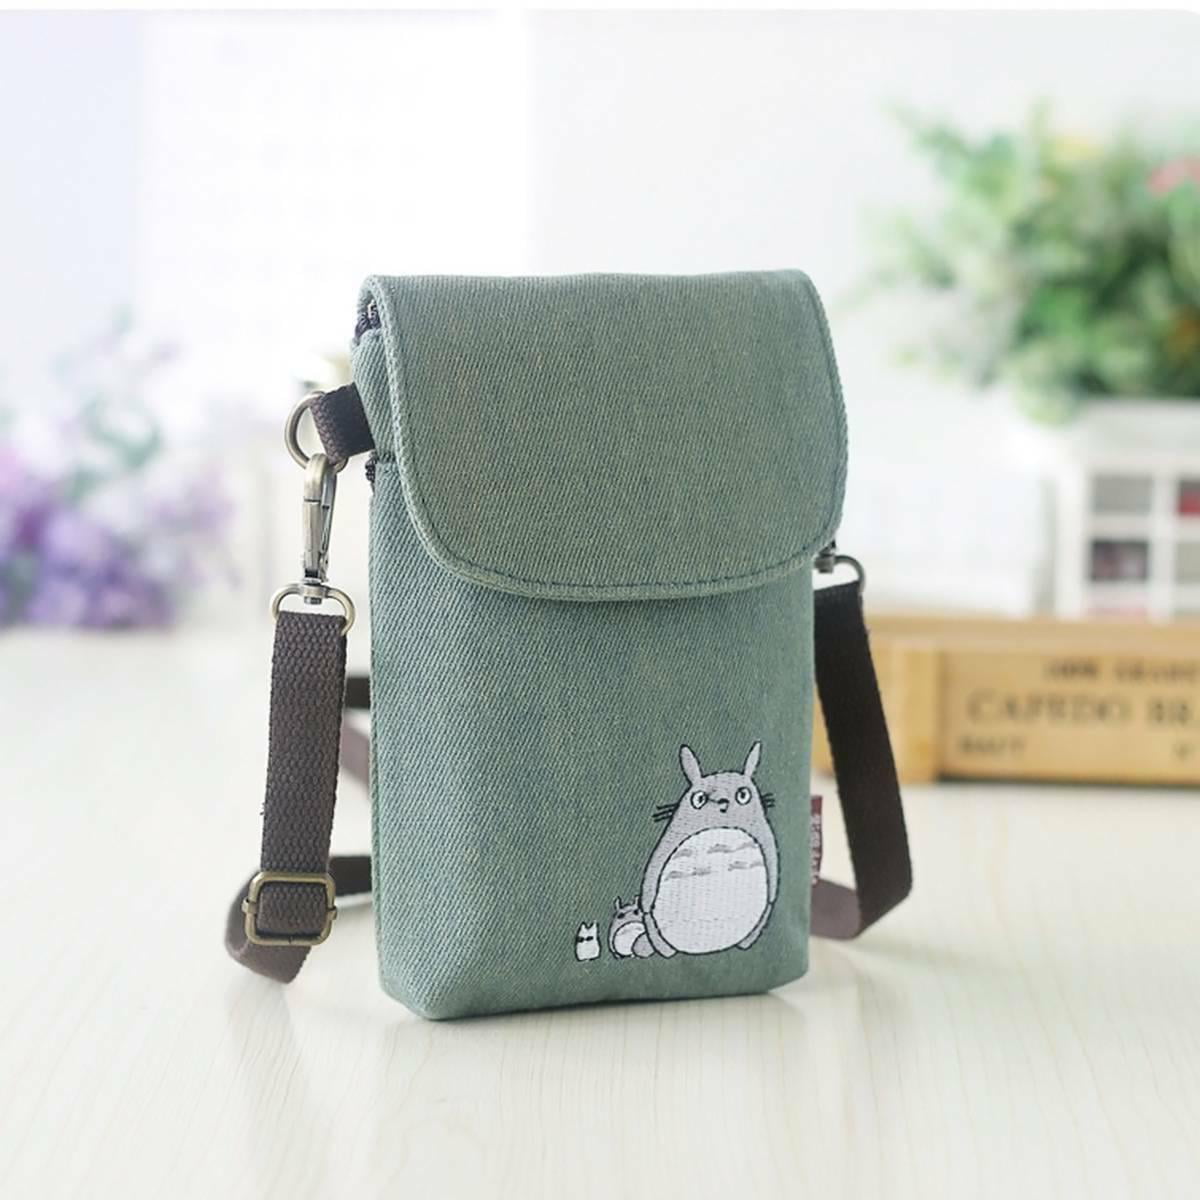 JYC/.Hot.Newest.Releases Cute Coin Purse Wallets Handbags for Women Many Fashion Styles